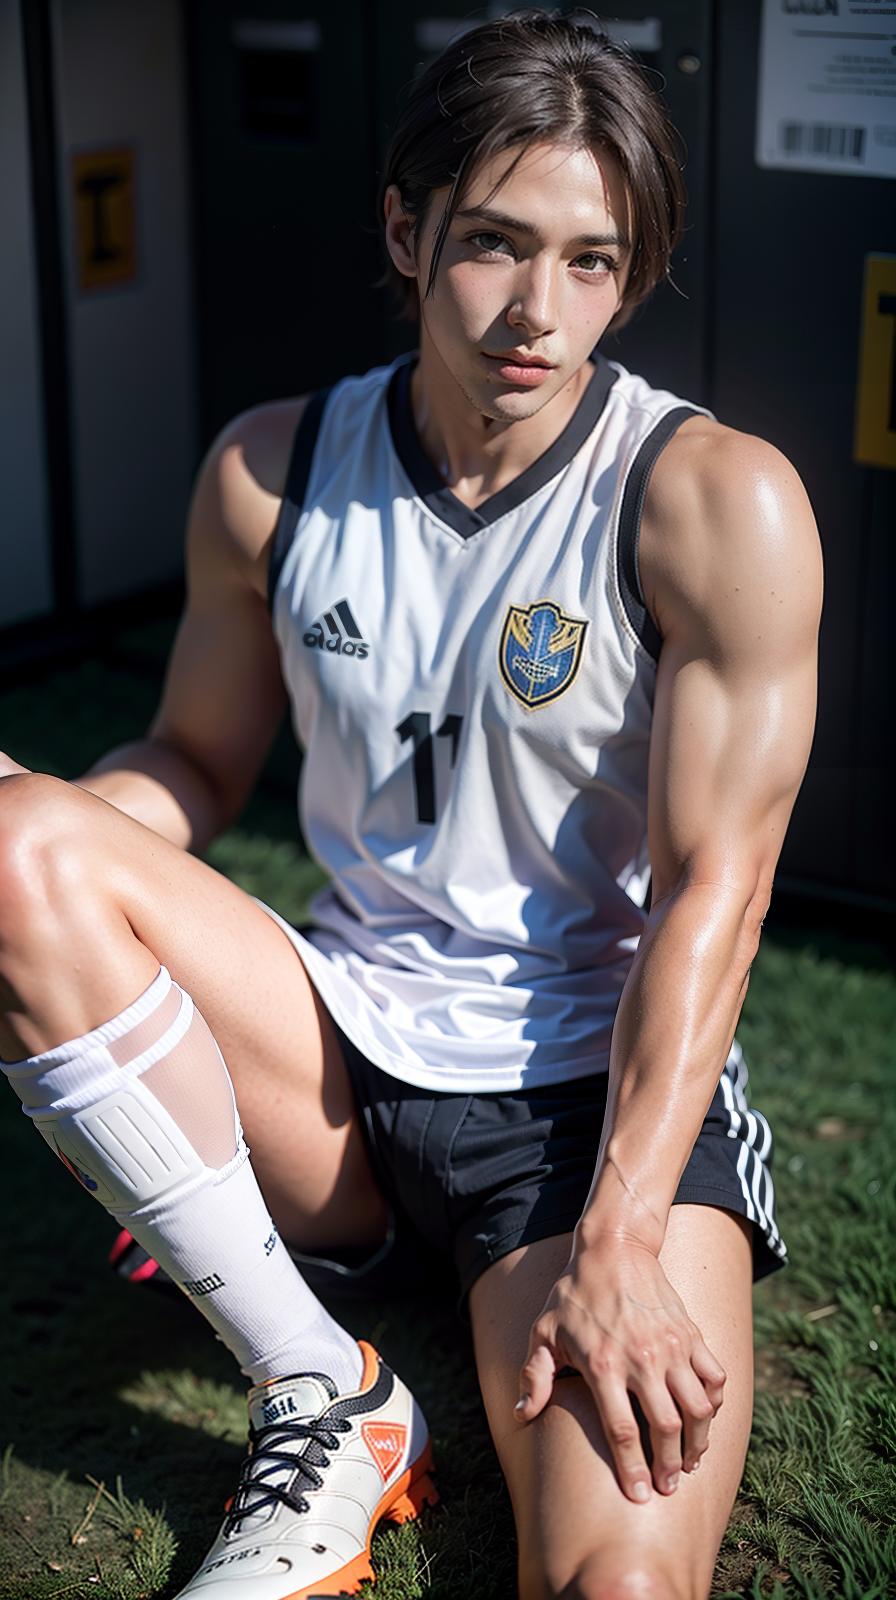  ultra high res, (photorealistic:1.4), raw photo, (realistic face), realistic eyes, (realistic skin), <lora:XXMix9_v20LoRa:0.8>, handsome, (male:2.5), (young soccer players:1.4), (pompadour:1.2), (white briefs:1.3), (sleeveless:1.2), spike shoes, (soccer shin guards:1.3), young, sitting posture, (spread legs:1.1), real skin, (sexy posing:1.3), hot guy, (muscular:1.3), naked, (bulge:1.1), trained calves, thigh, realistic, lifelike, high quality, photos taken with a single-lens reflex camera, (looking at the camera:1.2), (locker room:1.1)